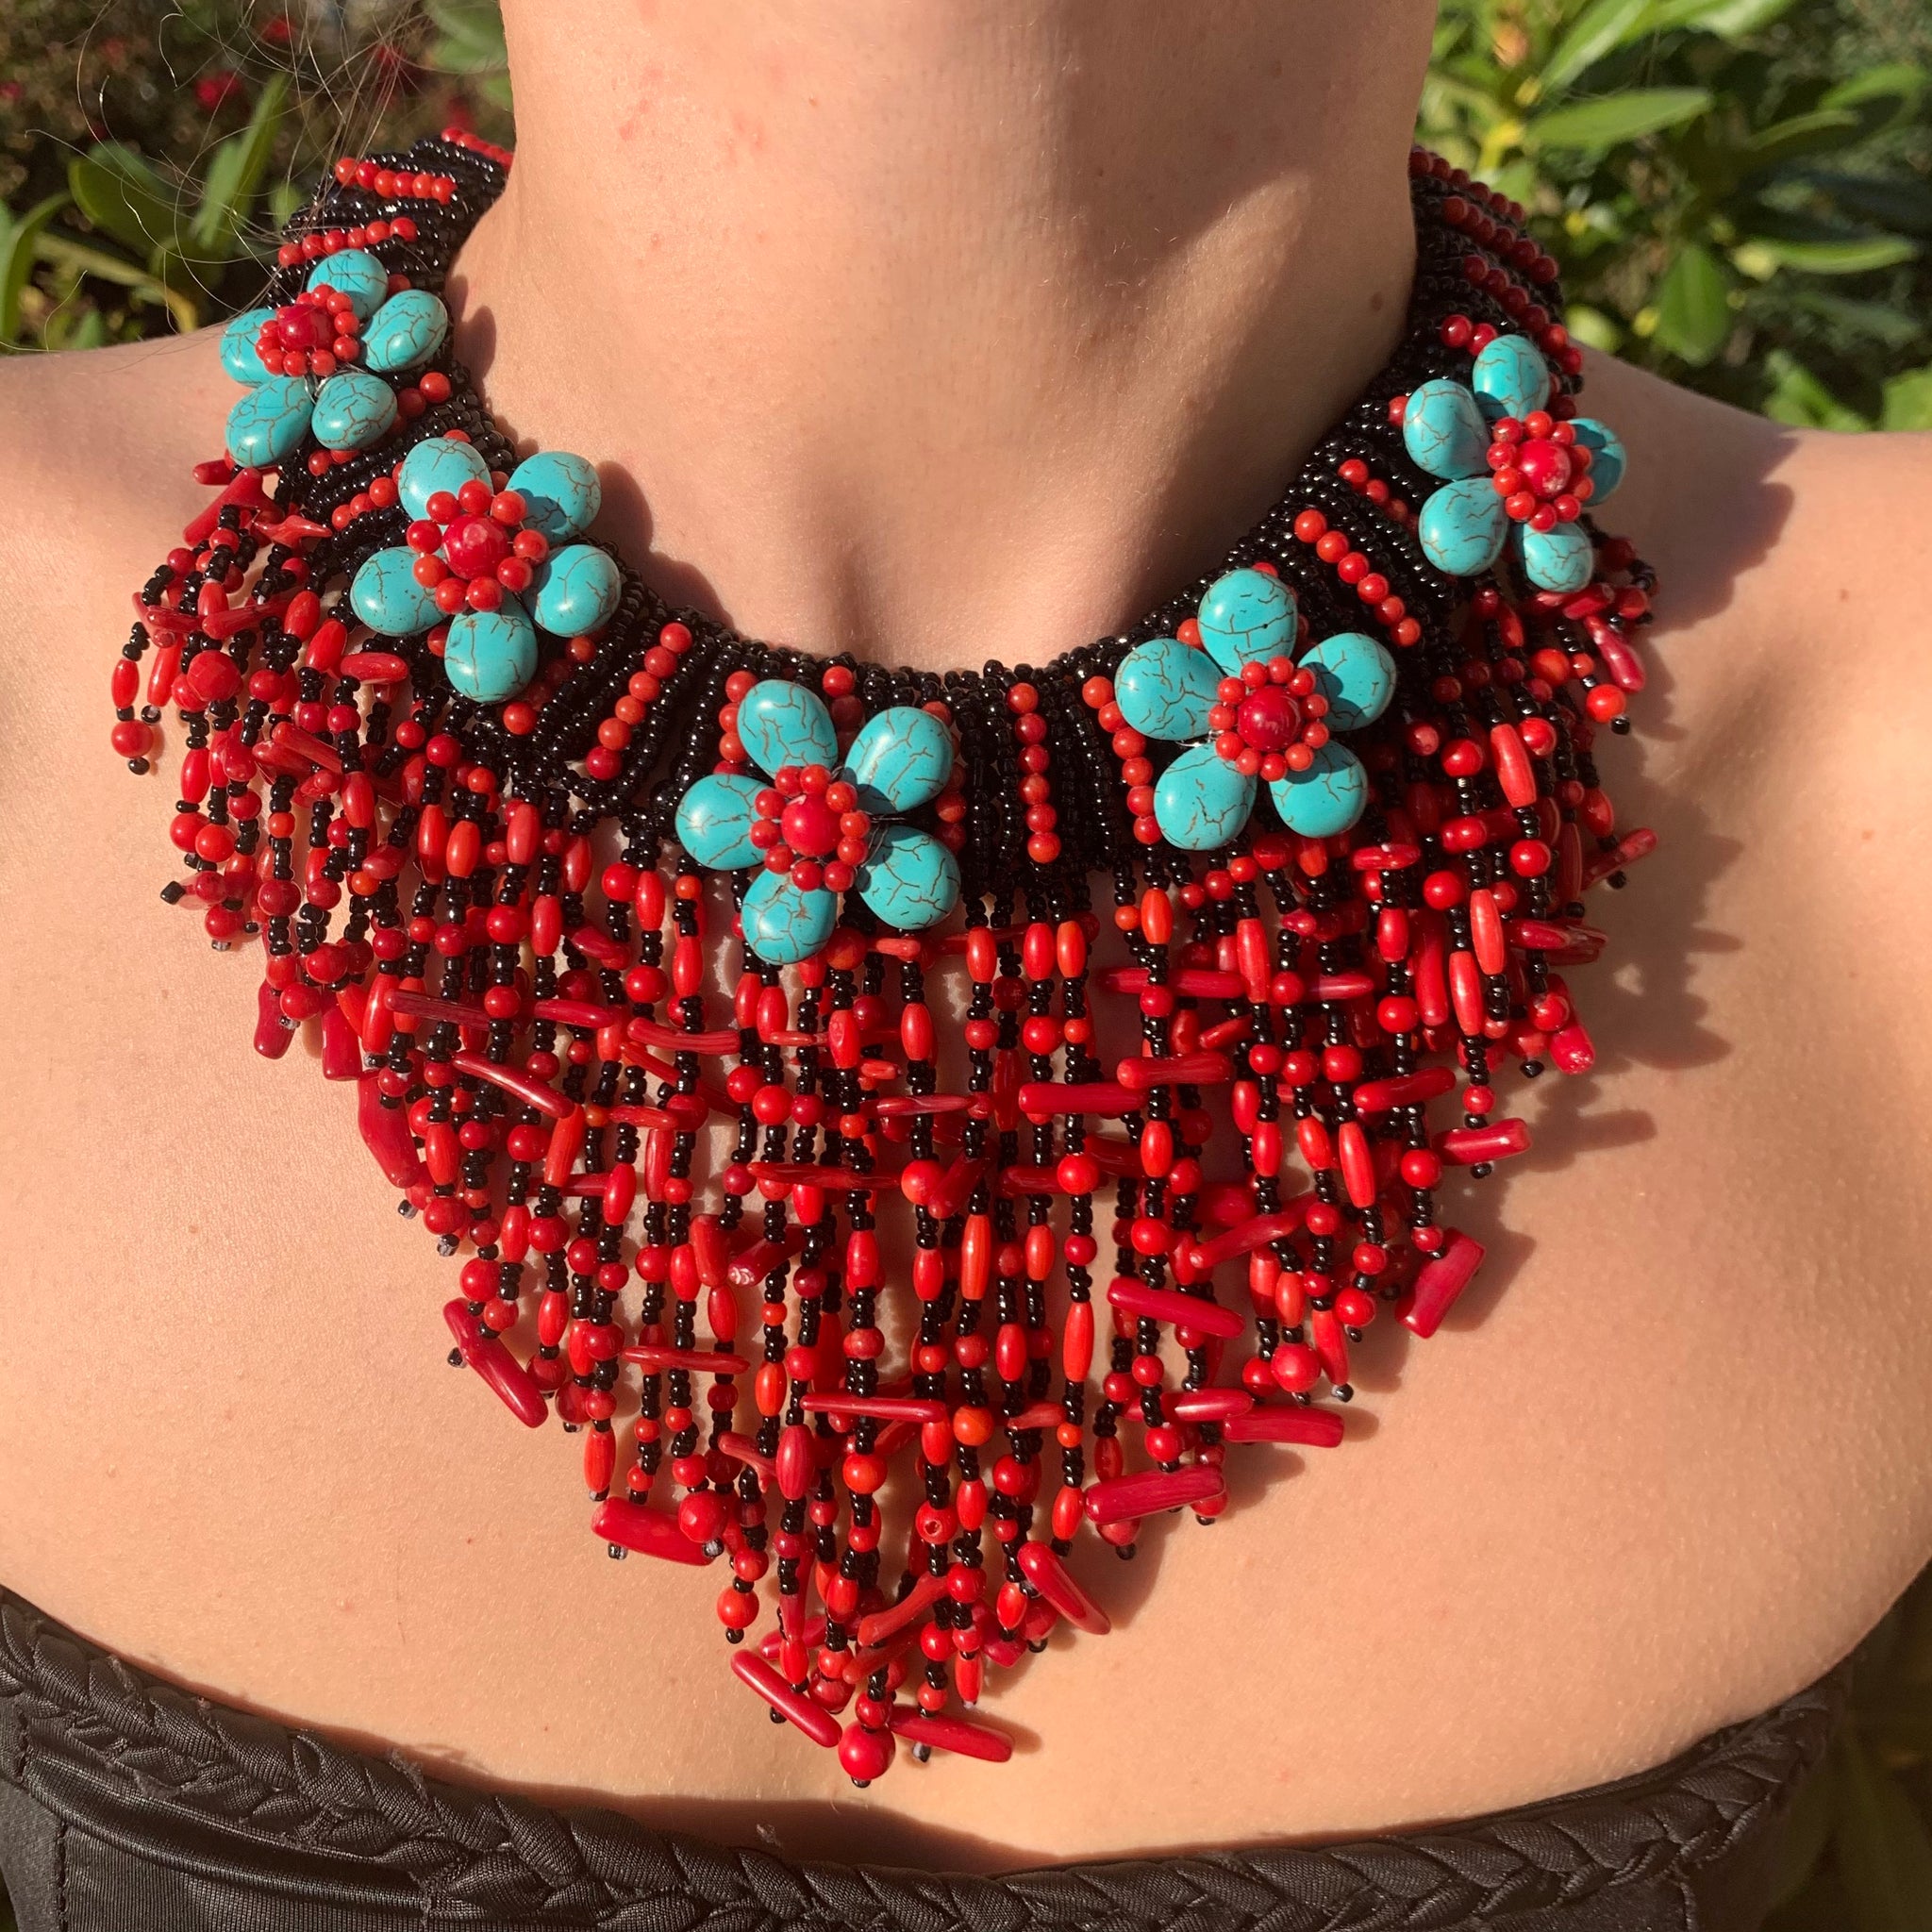 Handmade Drippy Branch Necklace 15" Waterfall Fringe Coral Turquoise Unique Jewelry